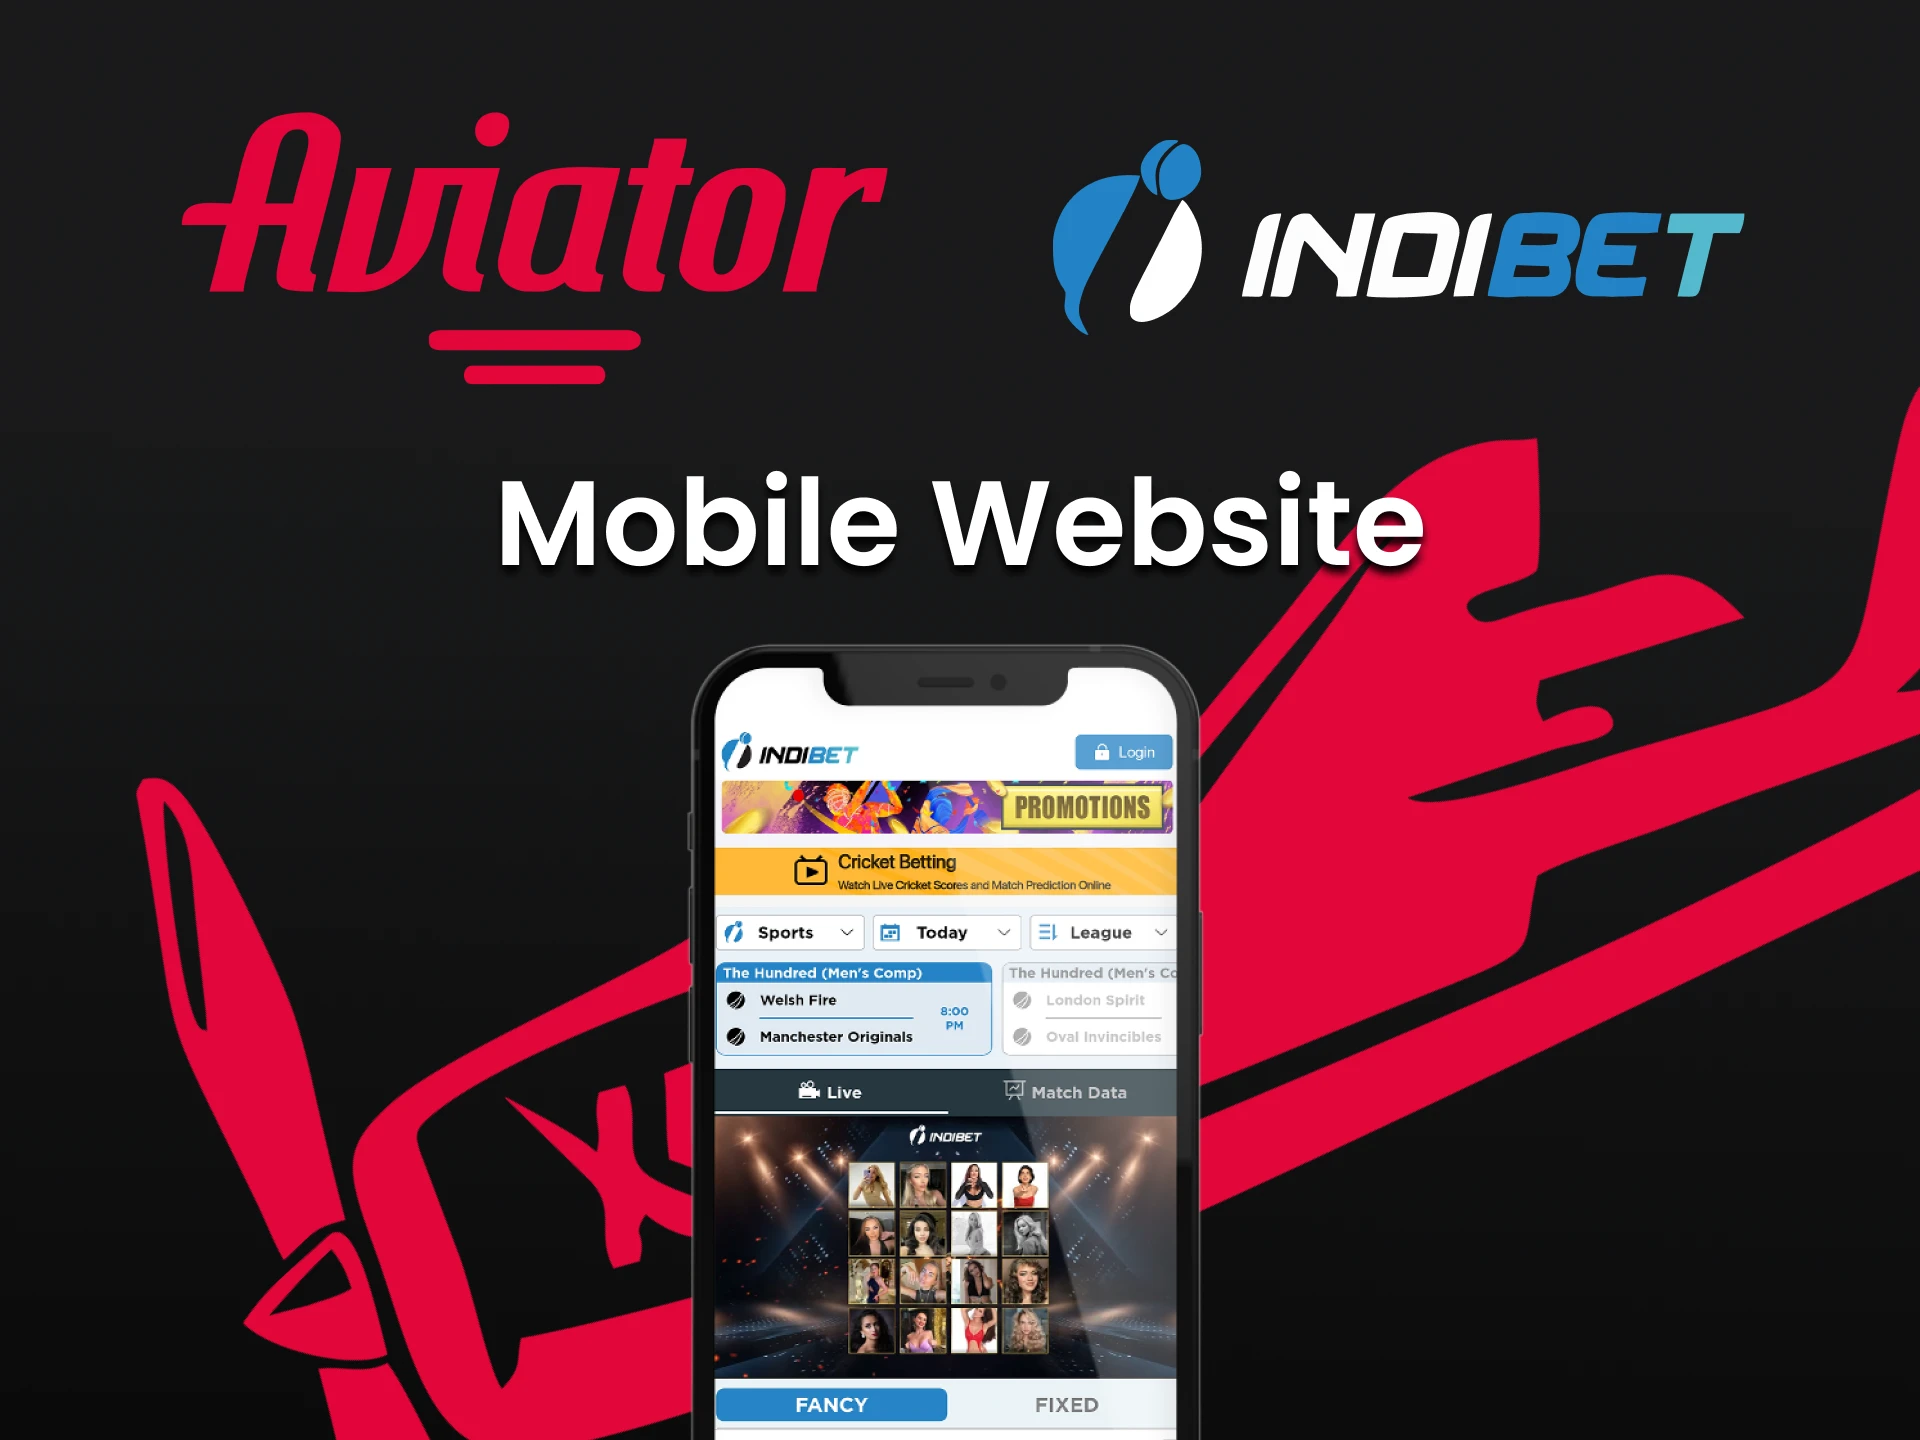 Visit the Indibet mobile site.